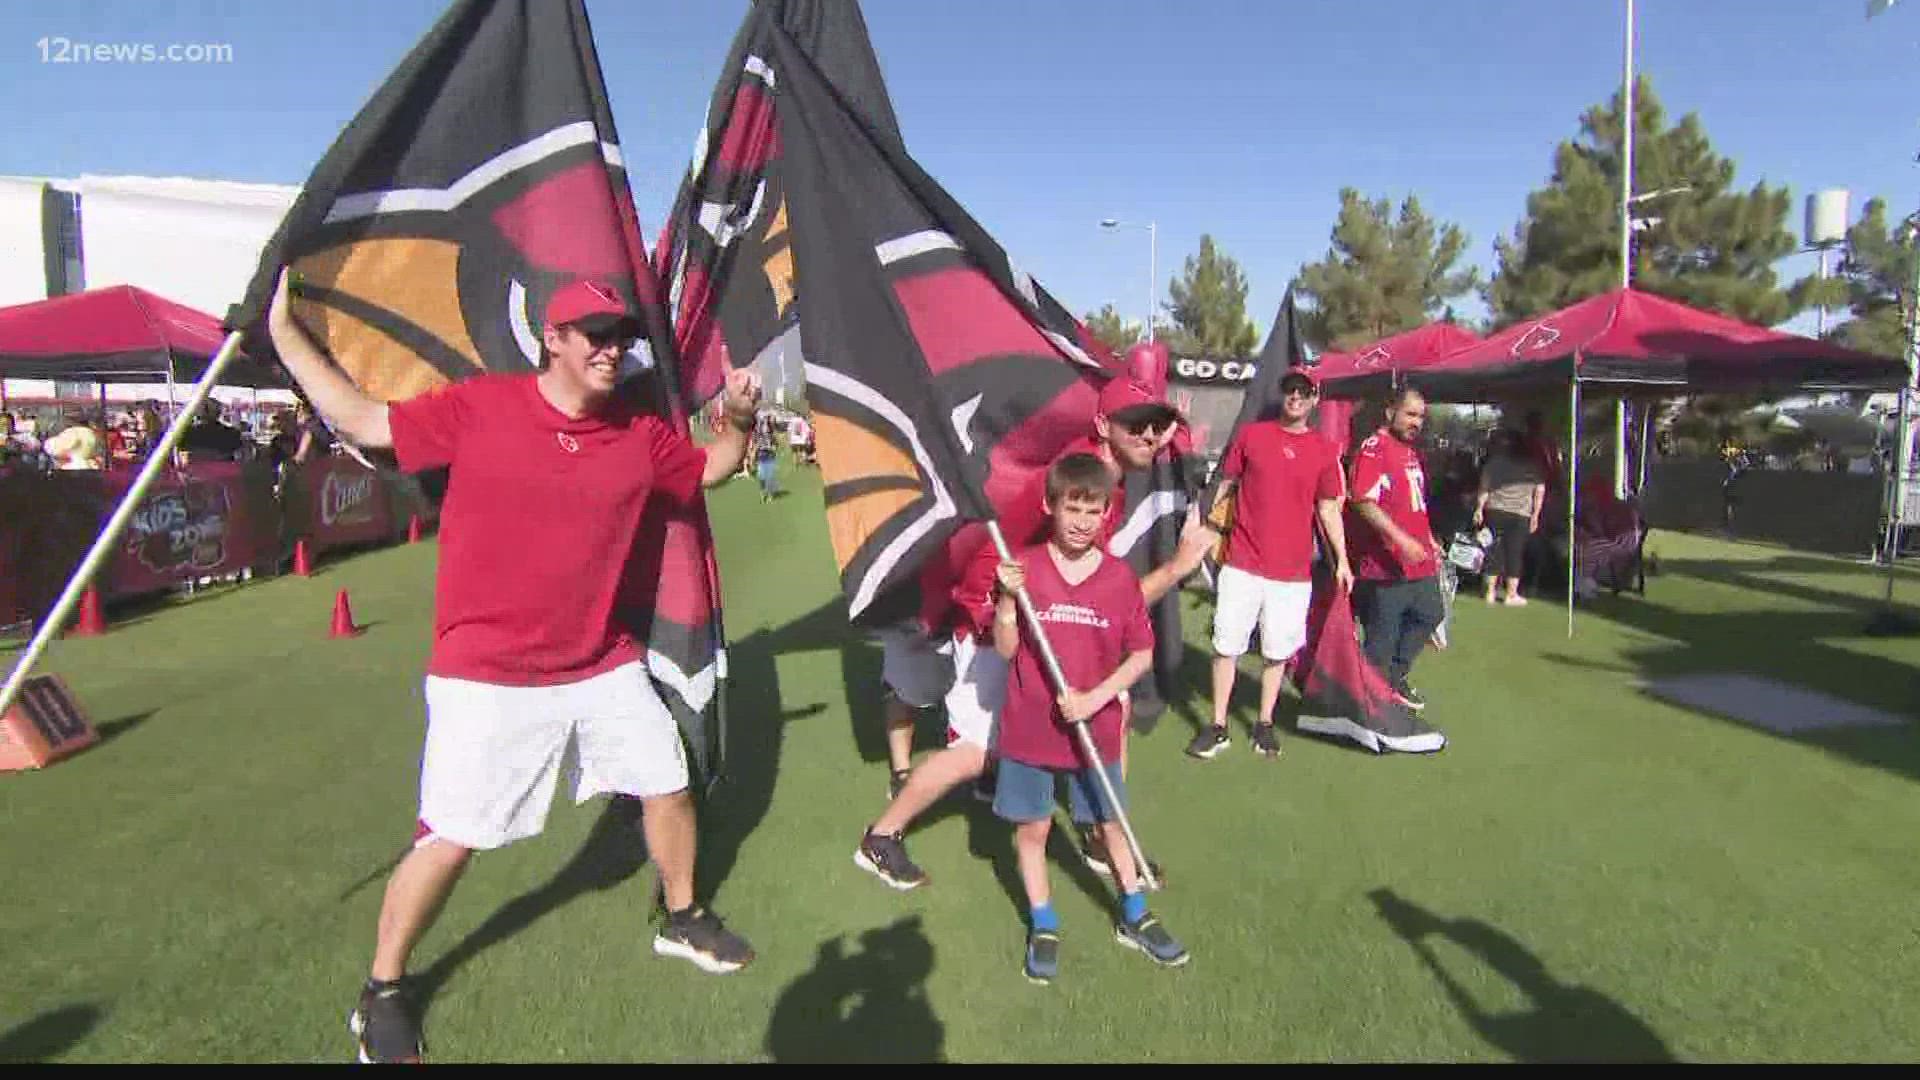 Who will be the next Arizona Cardinals player? Hundreds of fans showed up at State Farm Stadium to find out!